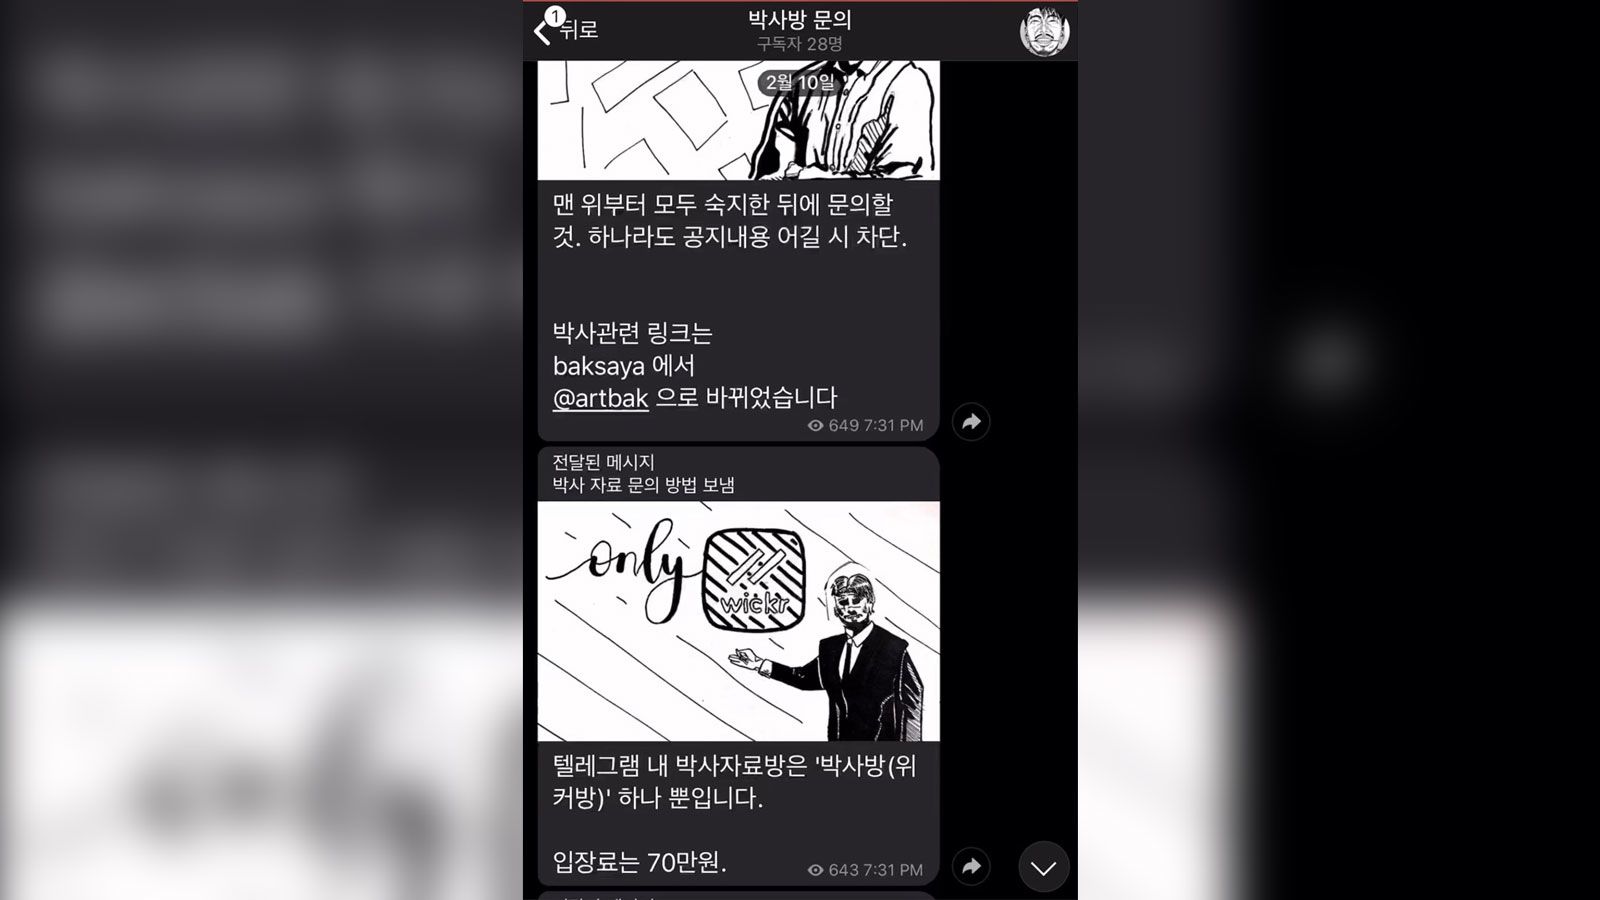 Forced Into Sex Slavery - Dozens of young women in South Korea were allegedly forced into sexual  slavery on an encrypted messaging app | CNN